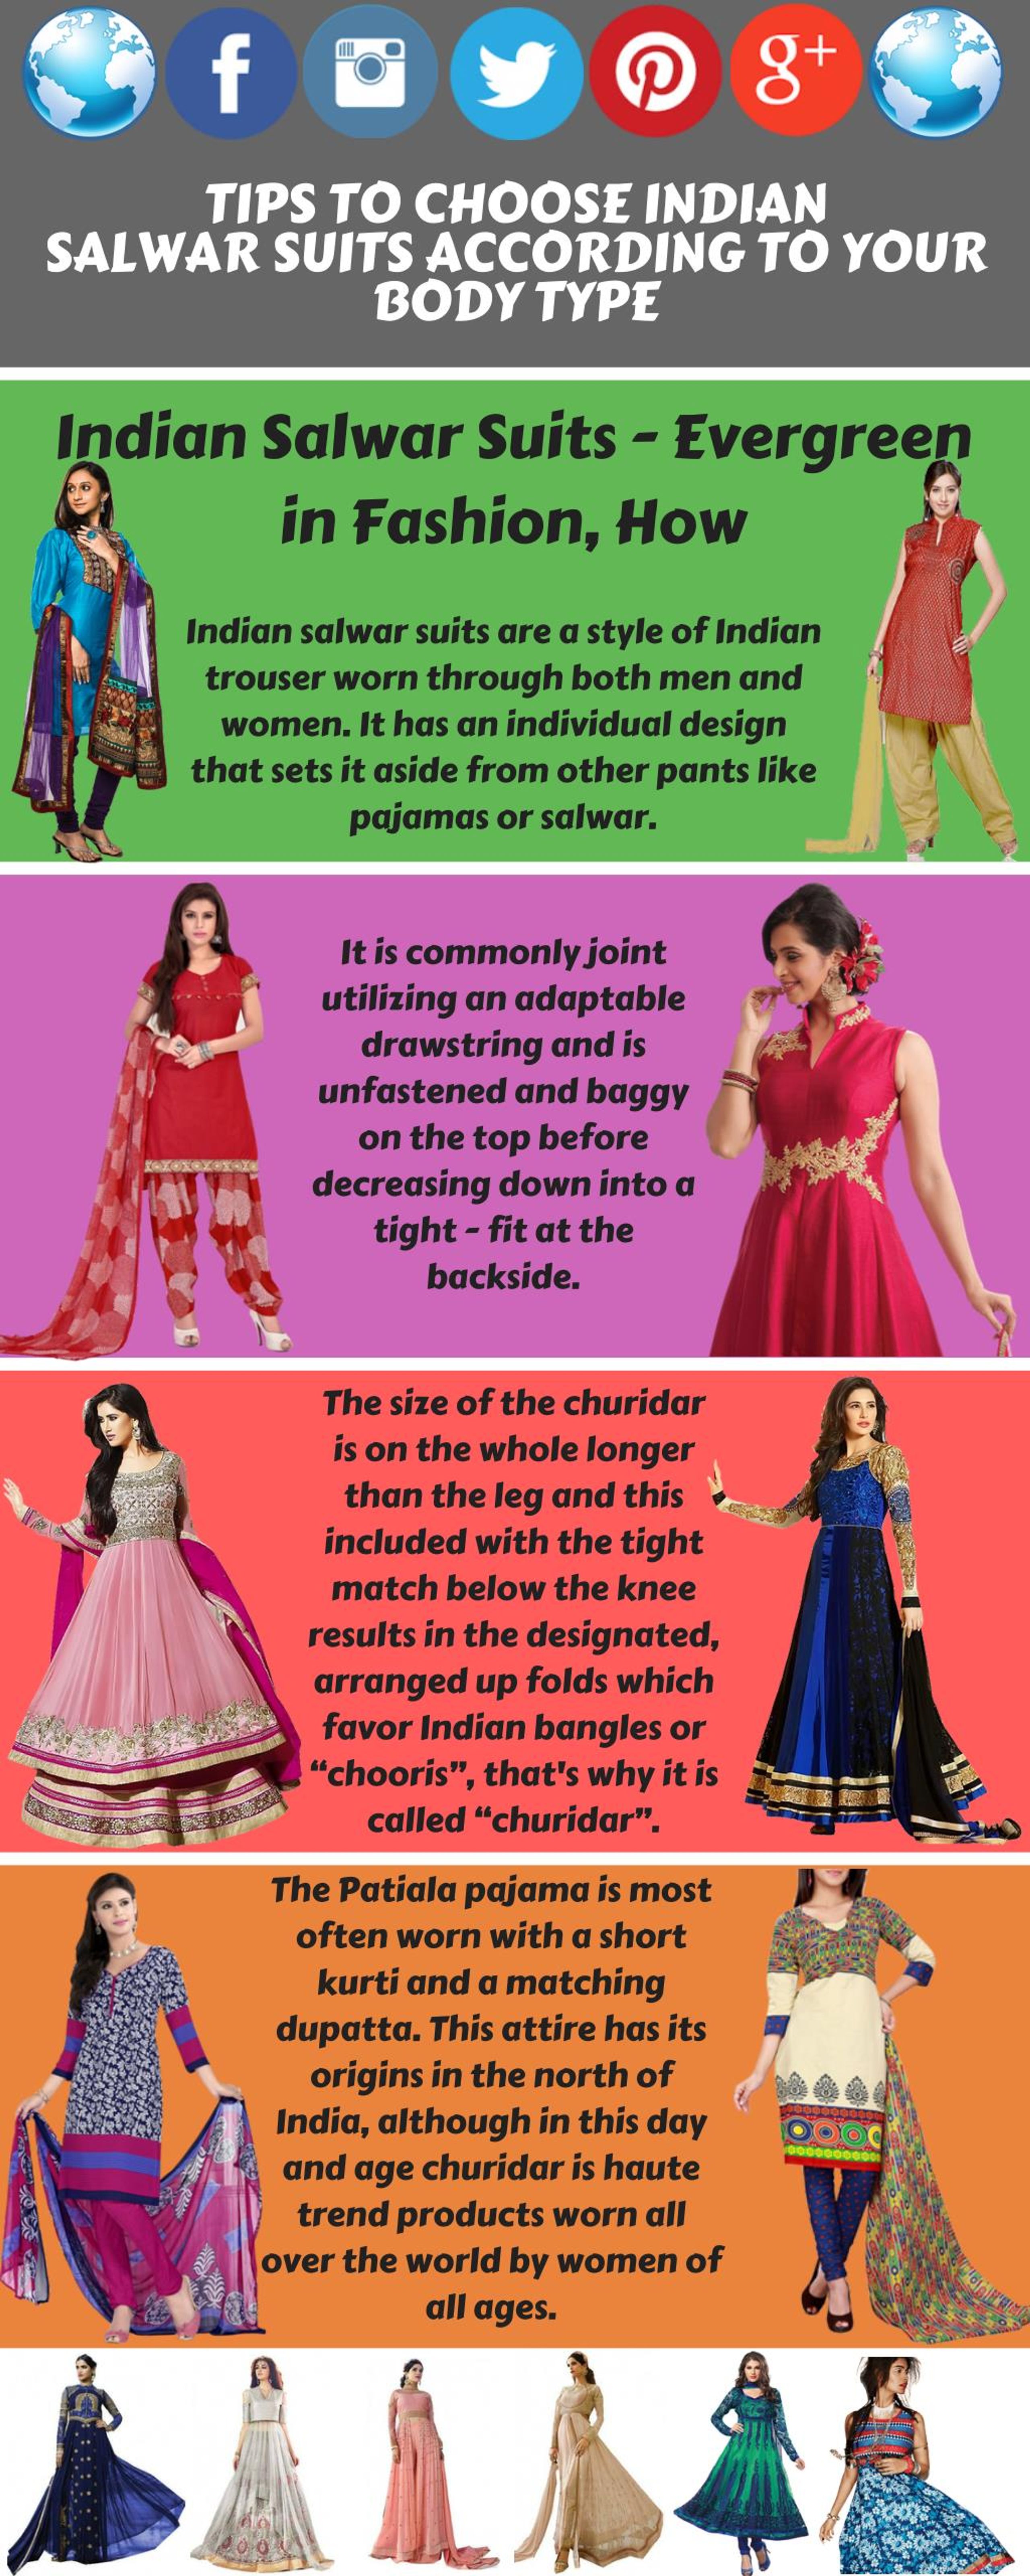 PPT - Tips To Choose Indian Salwar Suits According To Your Body Type  PowerPoint Presentation - ID:7516556